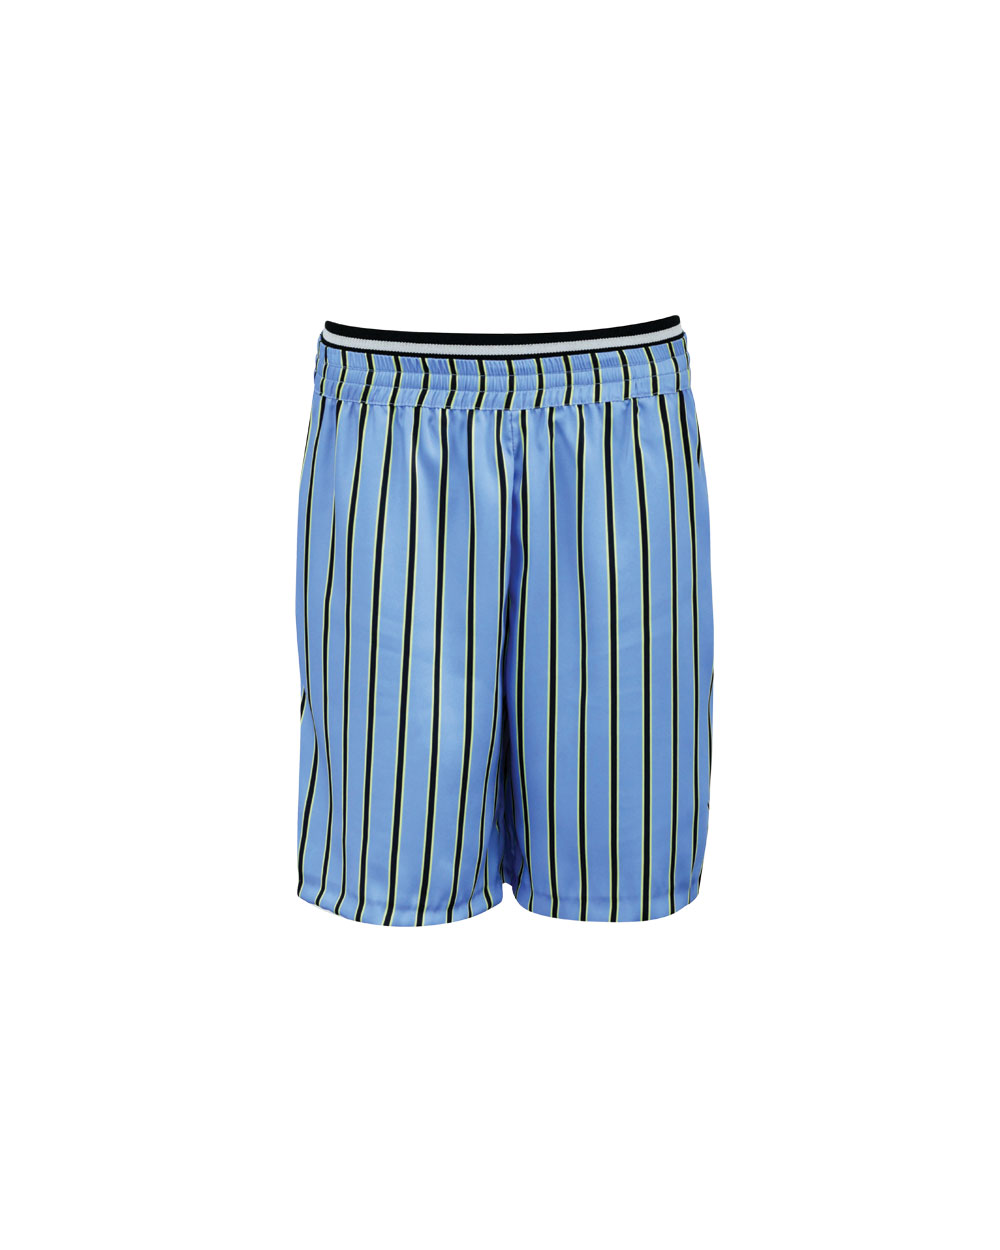 Coop shorts, $129